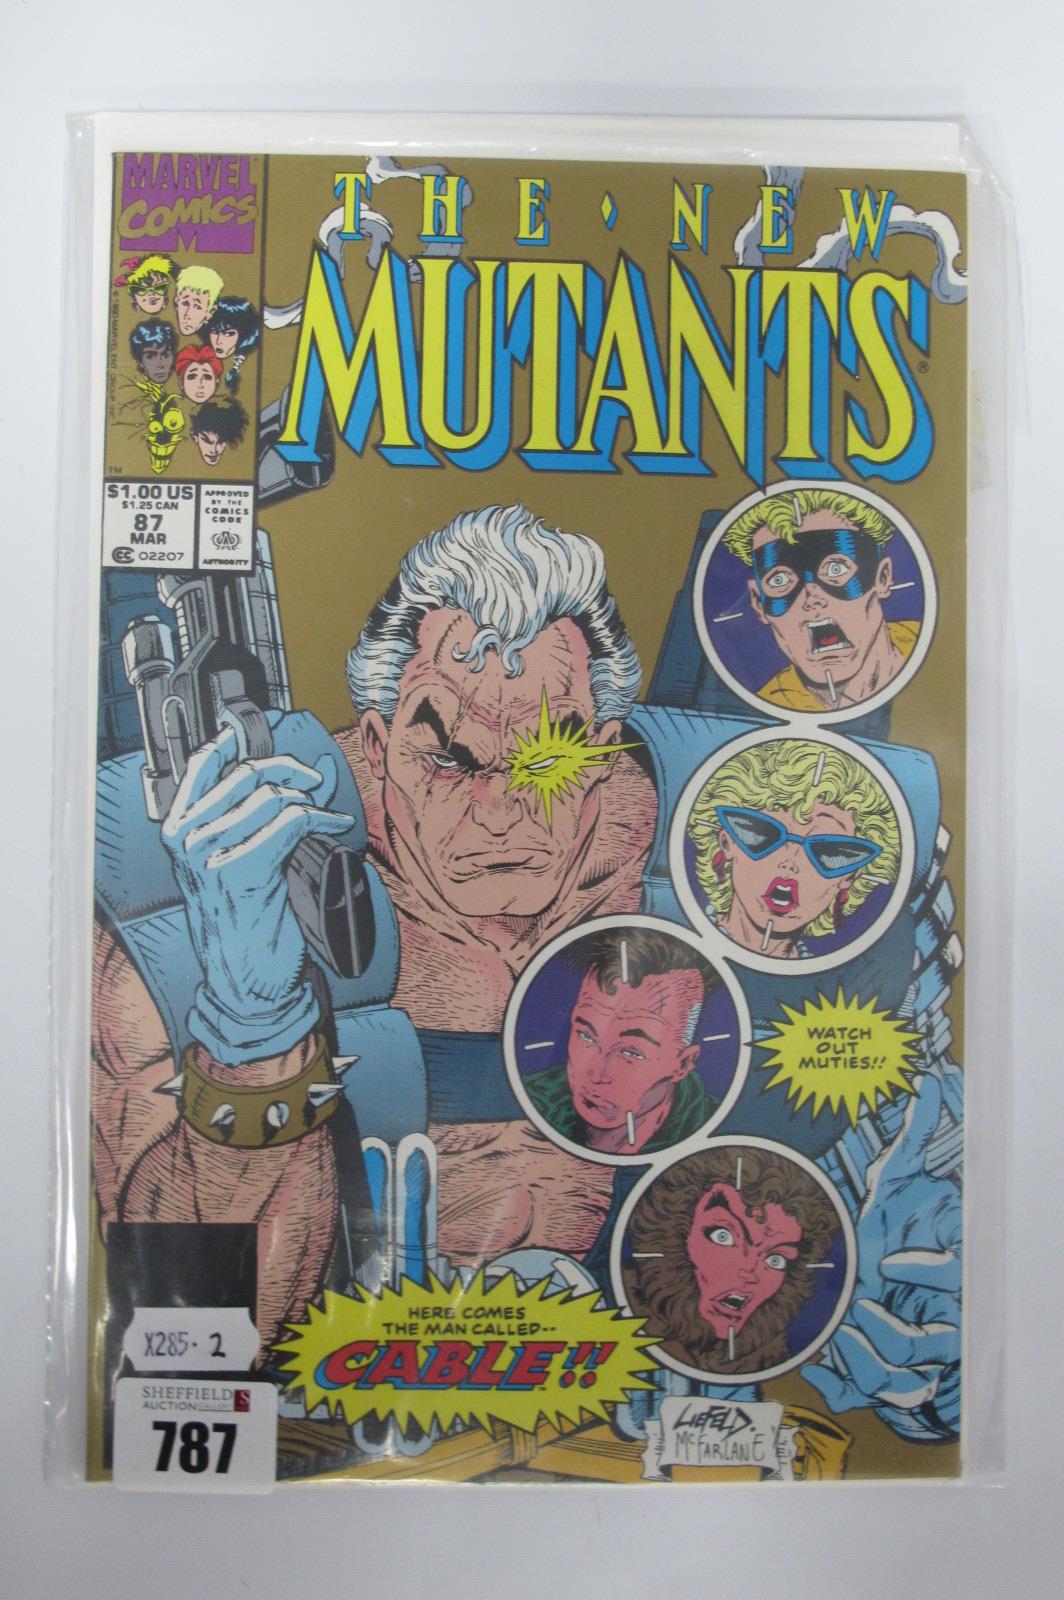 Marvel Comics - The New Mutants #87 second issue, overall good - very good condition.